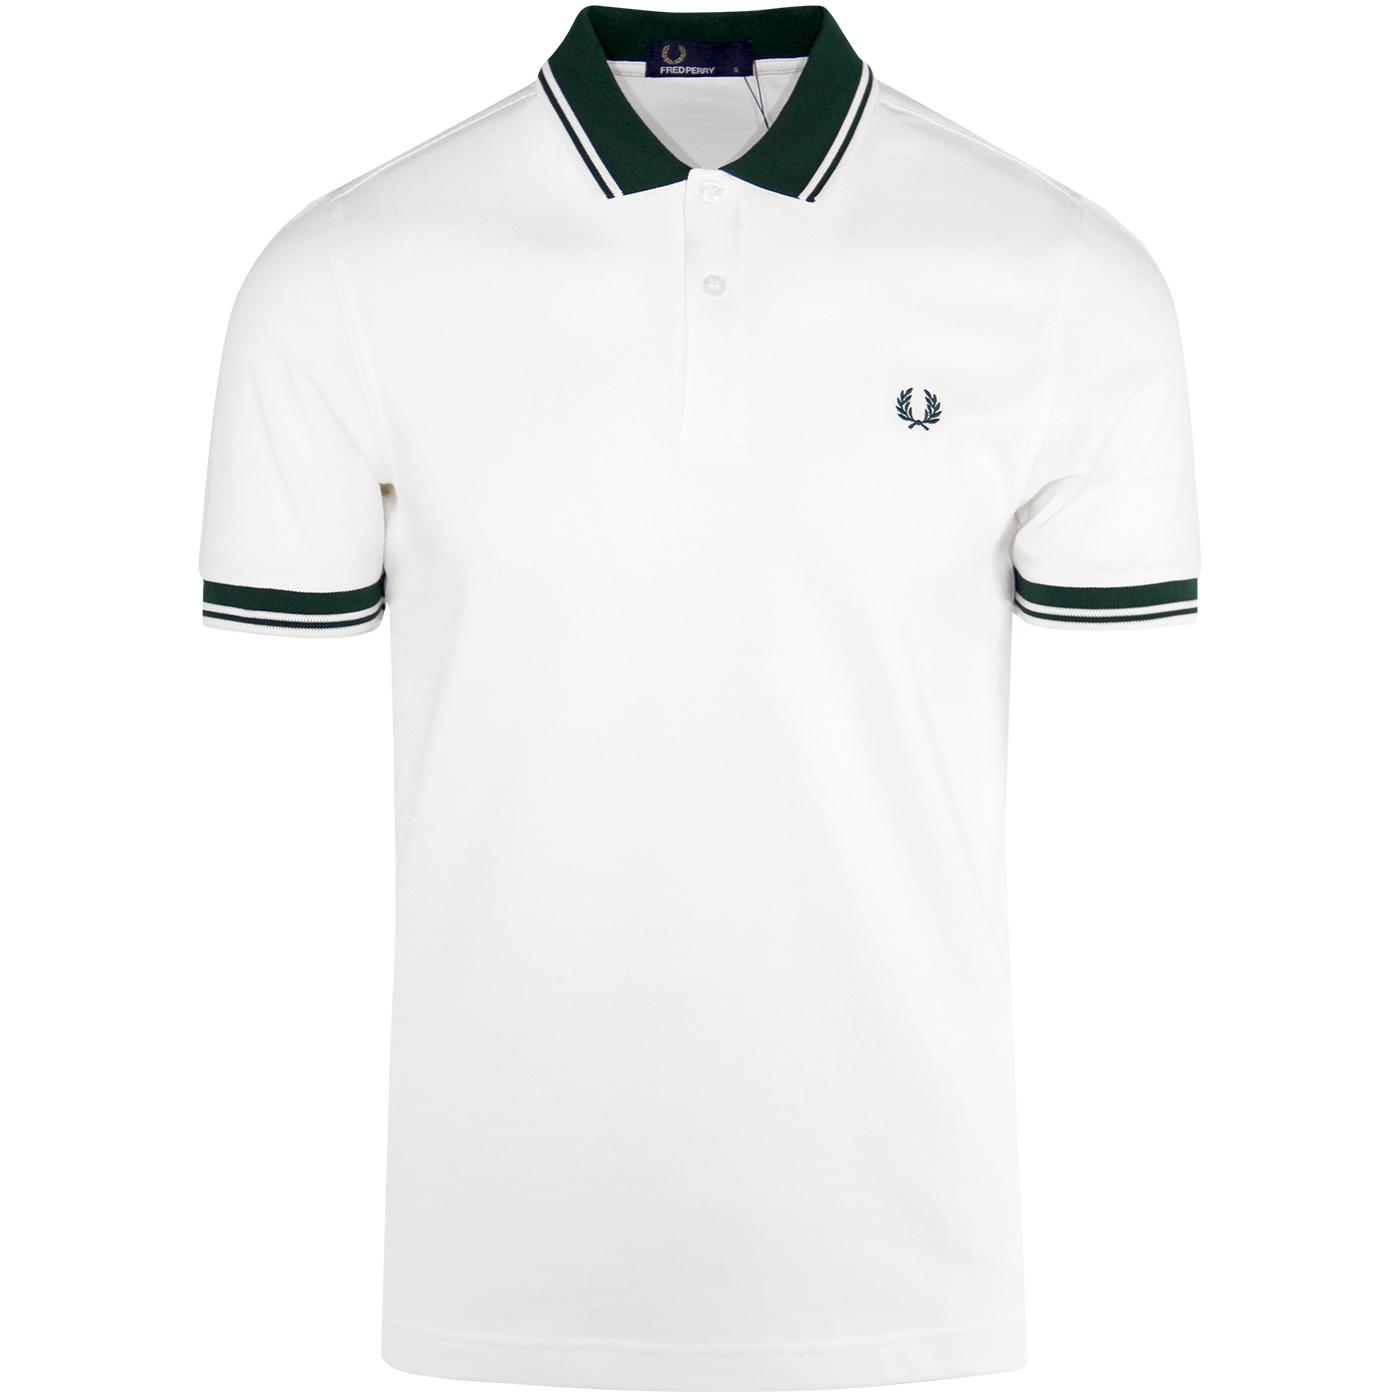 FRED PERRY Mod Twin Tipped Contrast Trim Polo (SW)